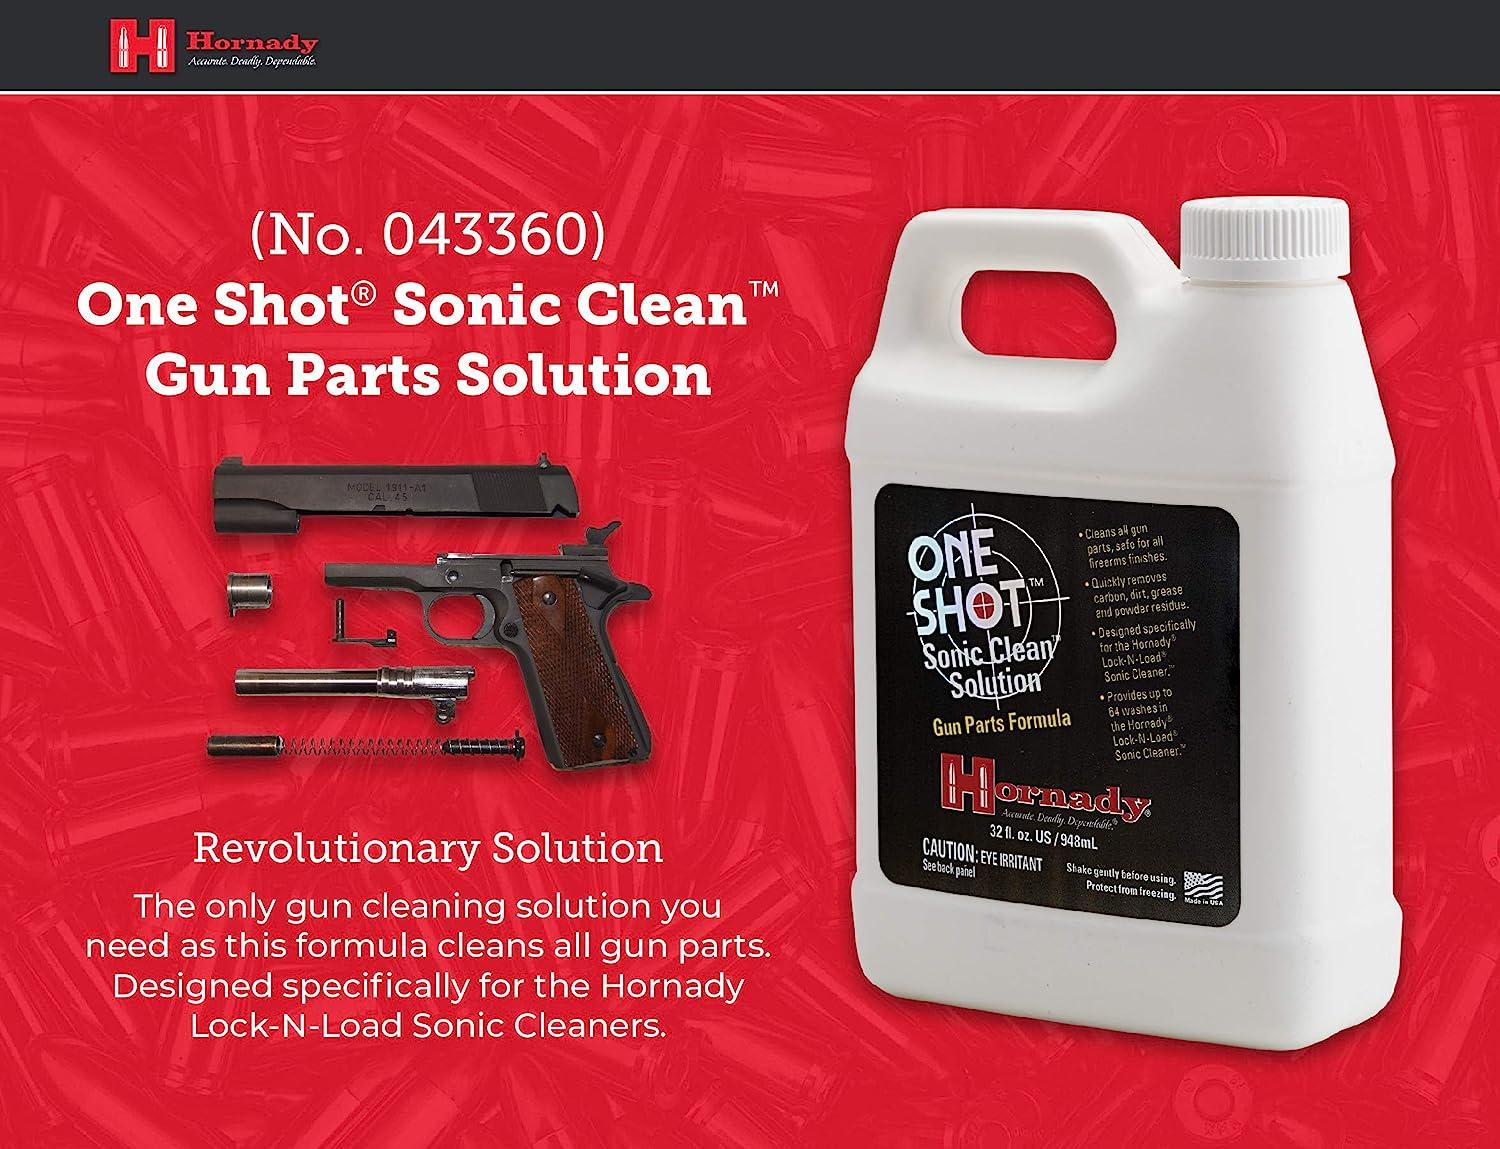 Hornady One Shot Sonic Clean Solution, 1 Quart Gun Cleaner Solution, Clean  All Gun Parts Safely and Quickly Designed for Use Lock-N-Load Sonic Cleaners  Item 043360